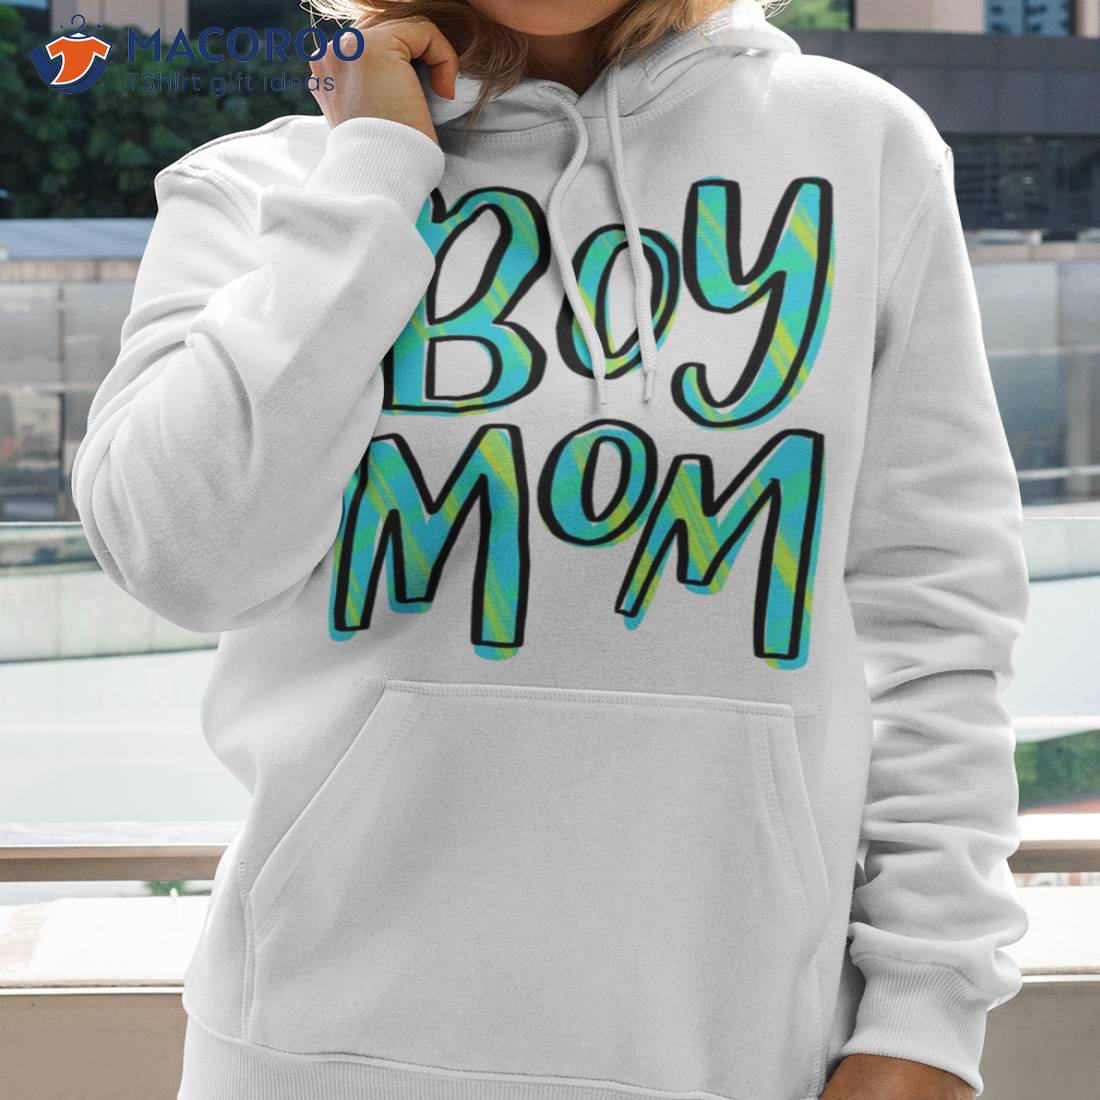 https://images.macoroo.com/wp-content/uploads/2023/05/boy-mom-t-shirt-cozy-gifts-for-mom-hoodie-2.jpg